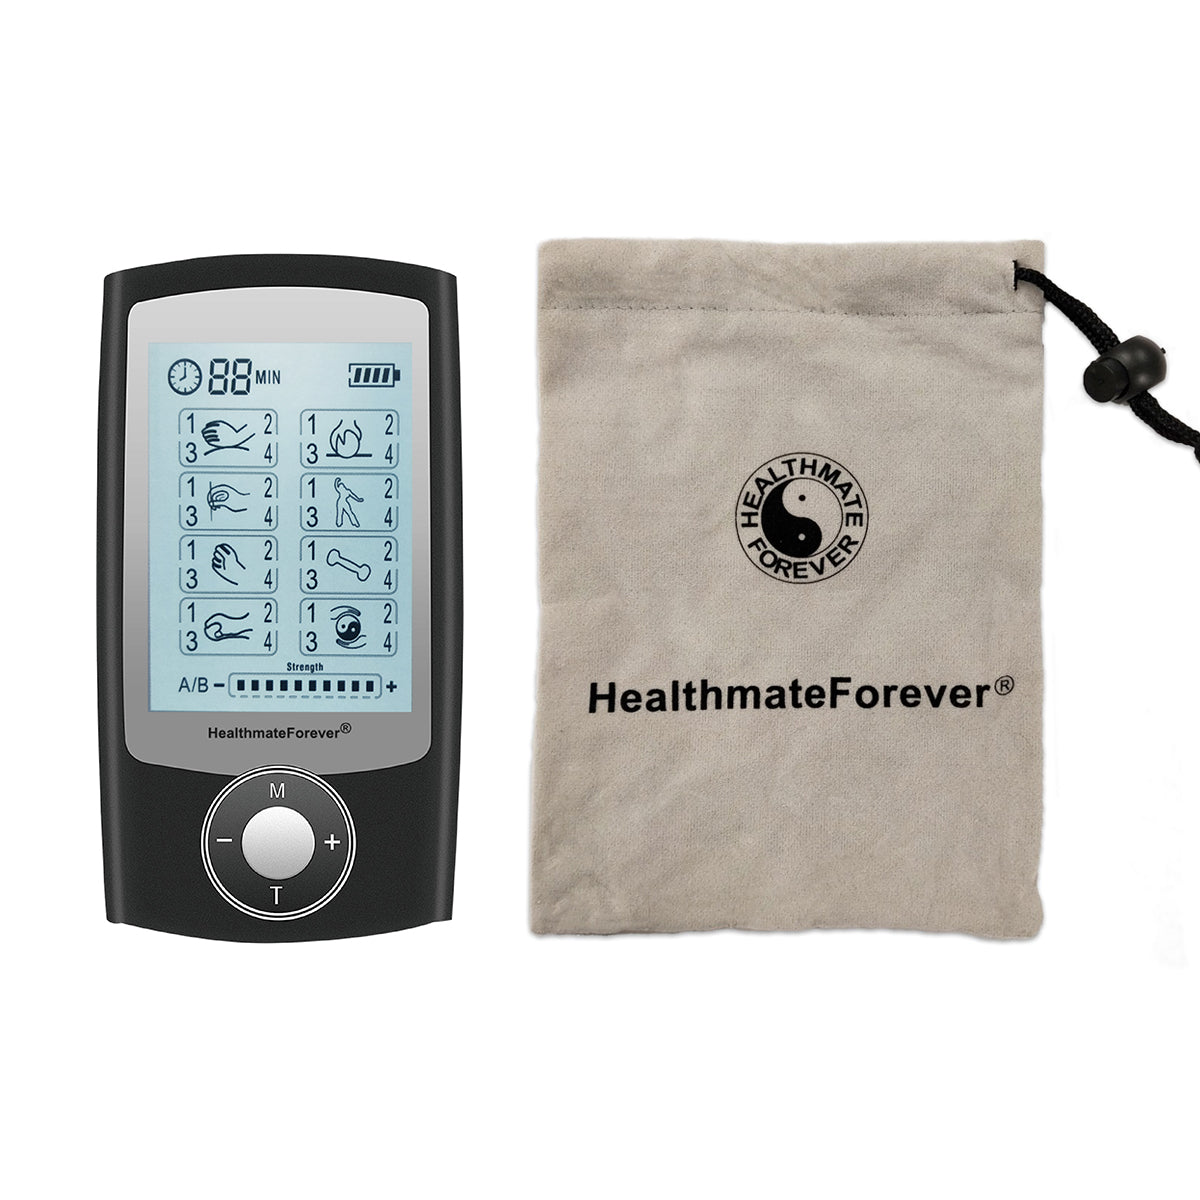 PRO18AB Pain Relief TENS Unit & Muscle Stimulator - 2 Year